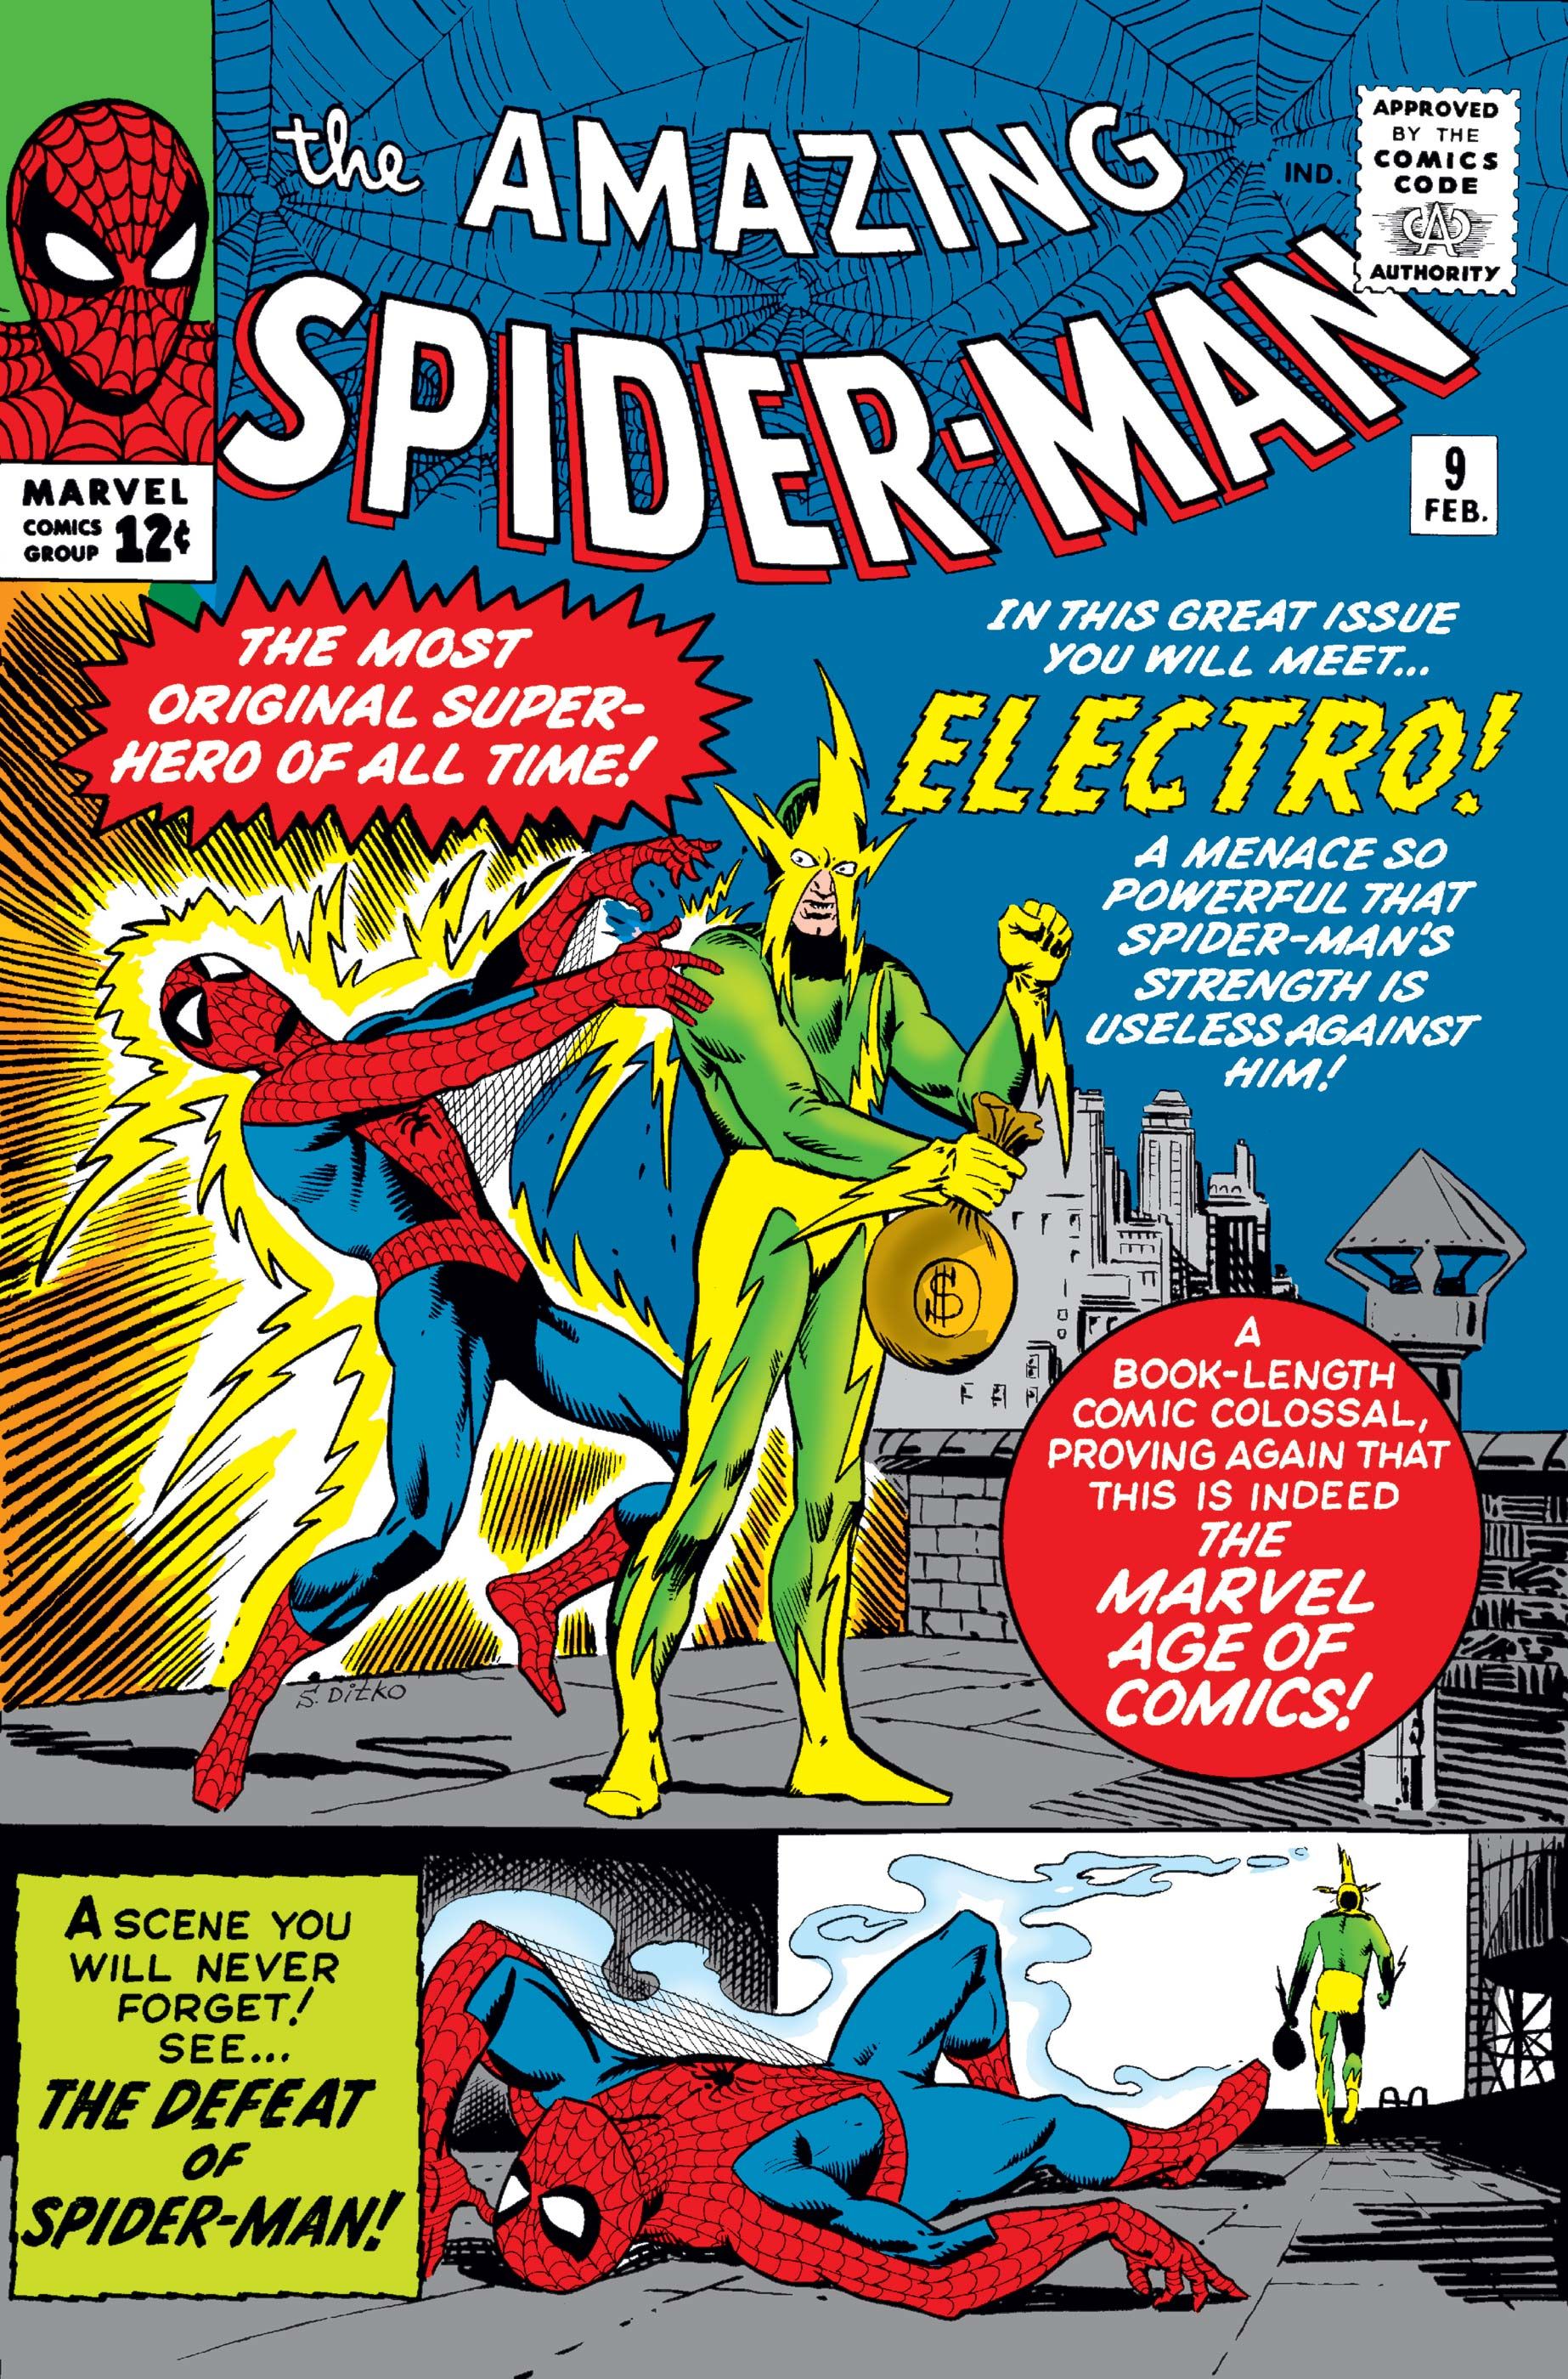 Amazing Spider-man 9 cover of spider-man fighting electro